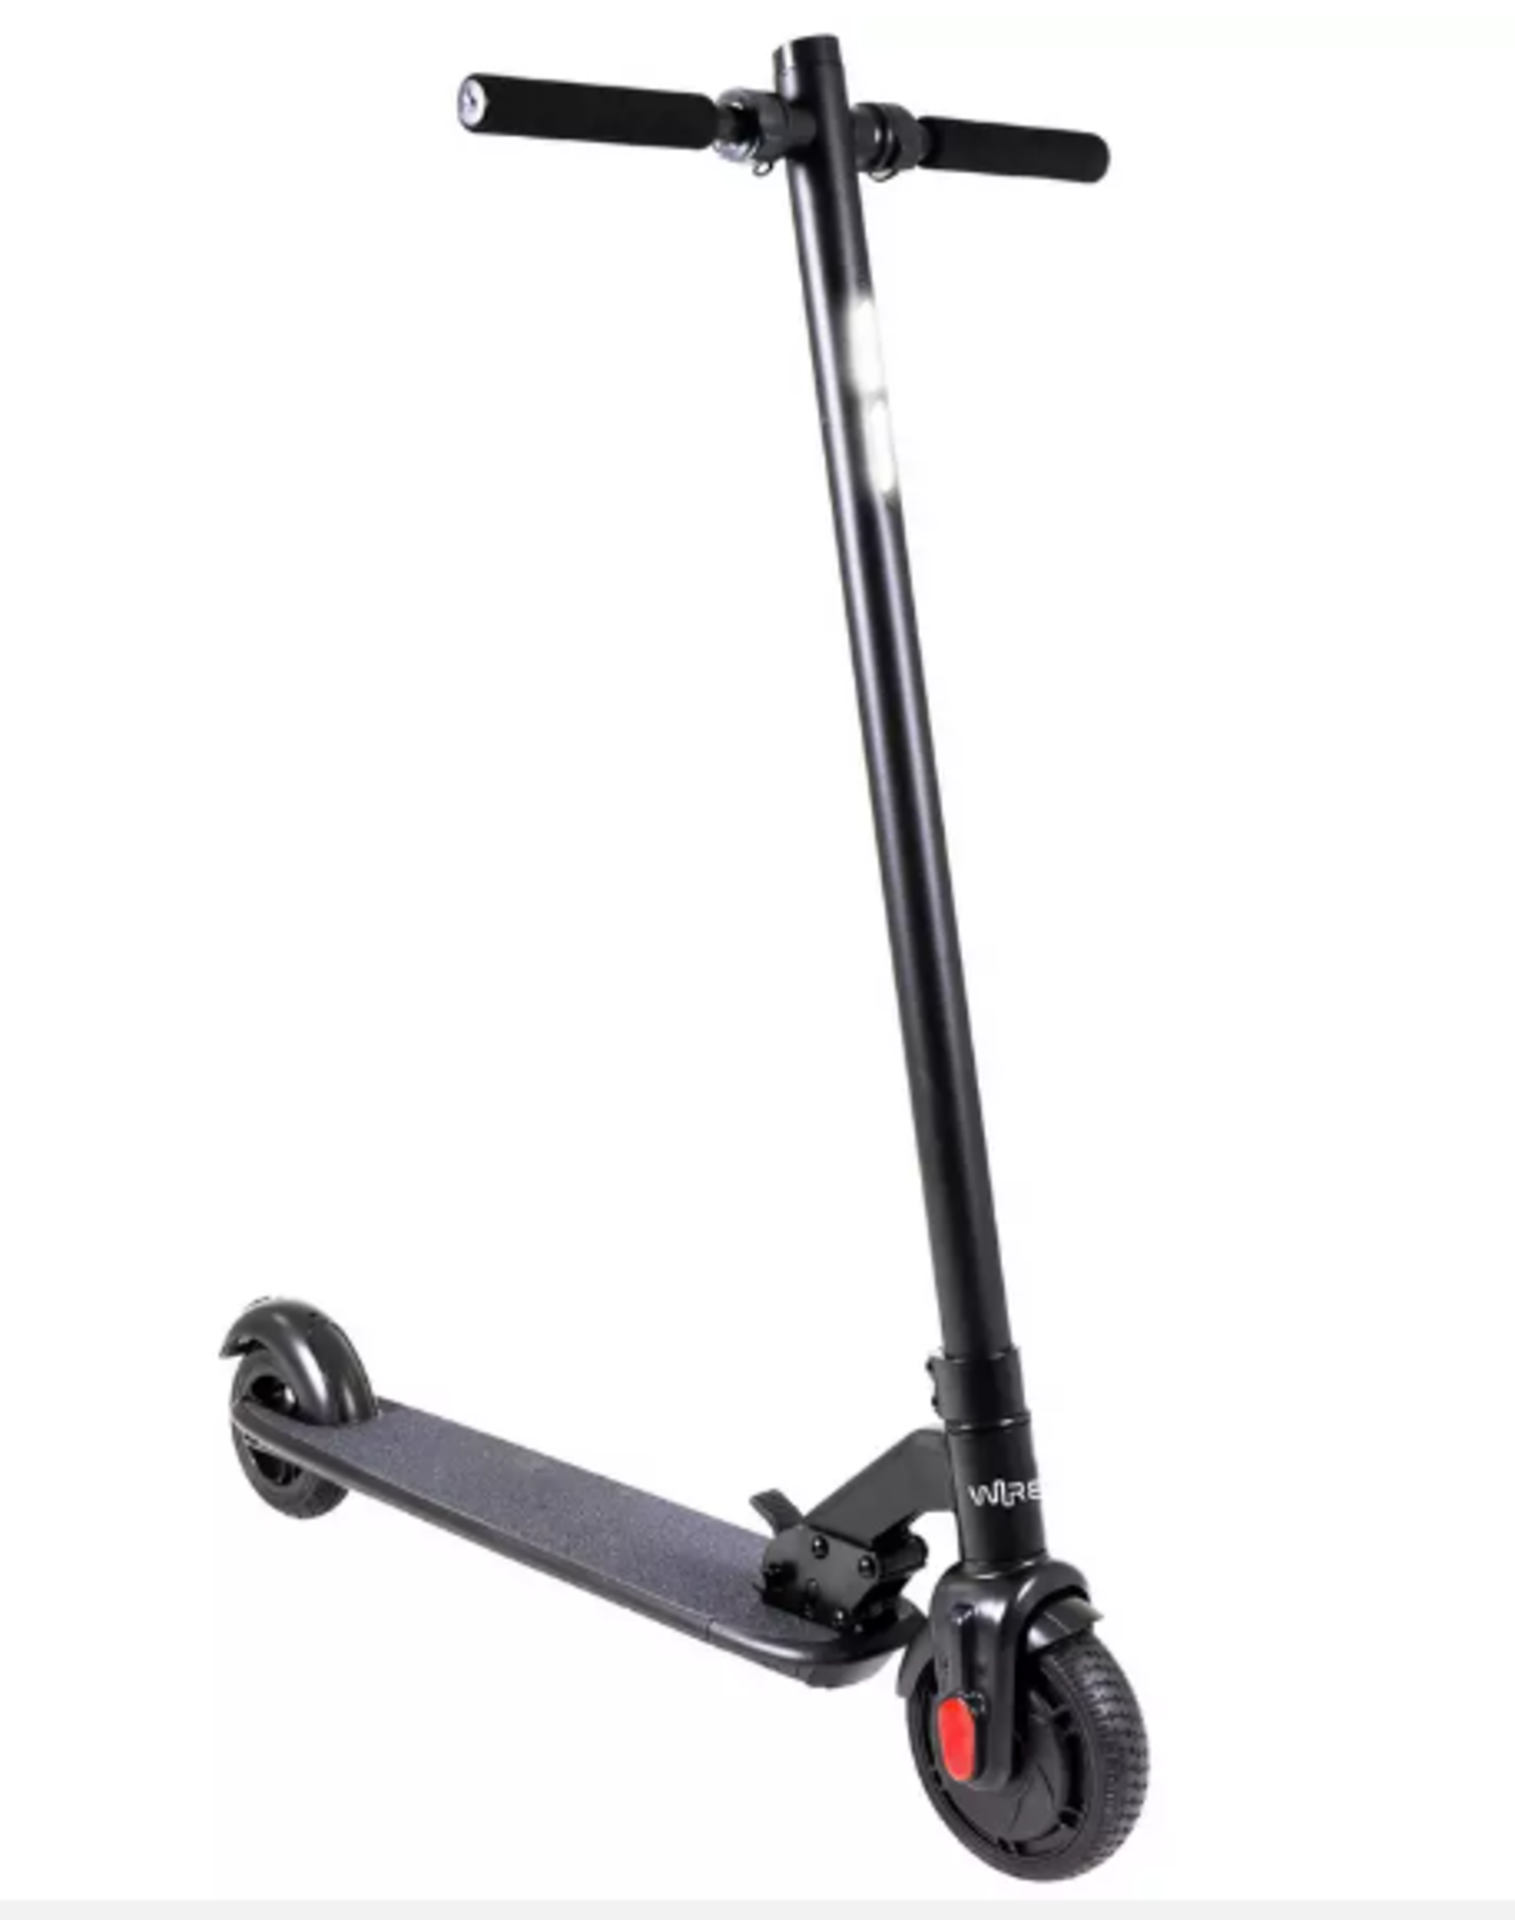 Wired 200 Adult Folding Electric Scooter. - ER45. RRP £300.00. The Wired 200 electric scooter weighs